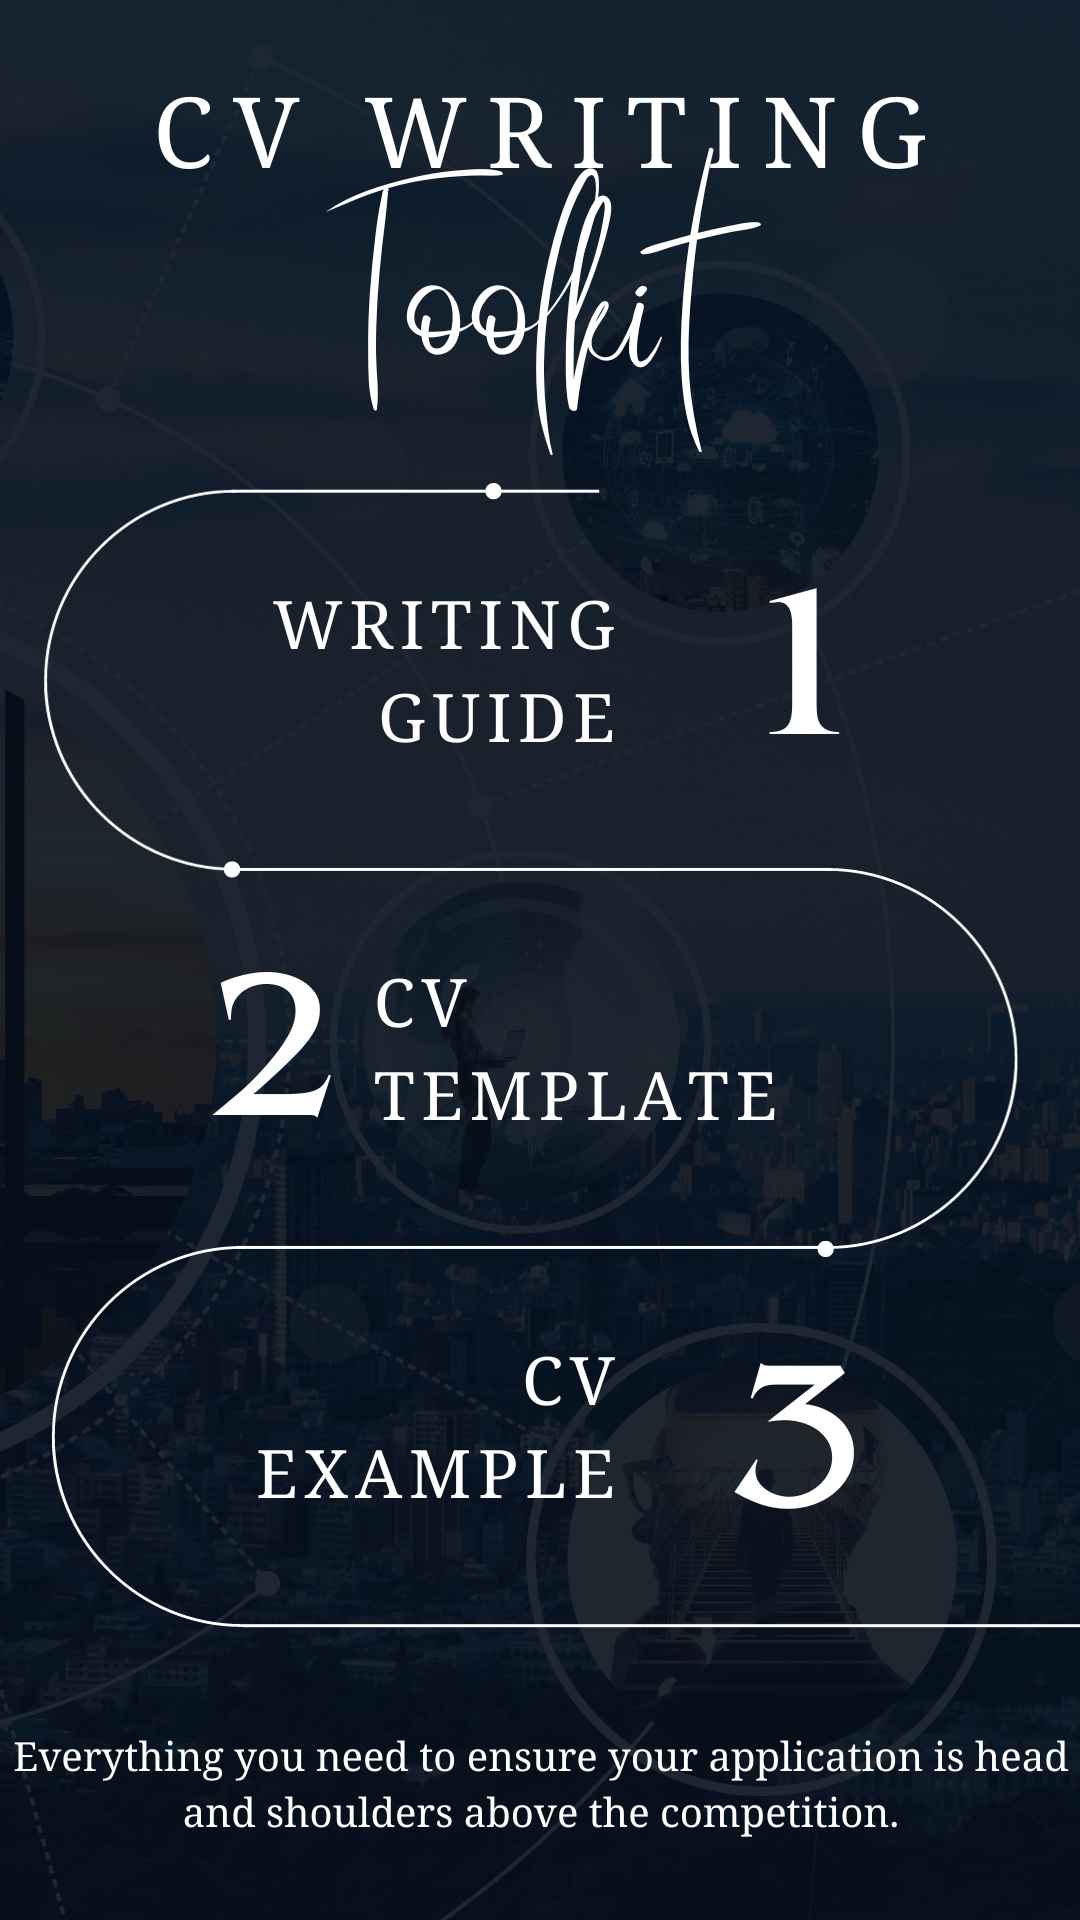 Sales Manager CV Writing Toolkit